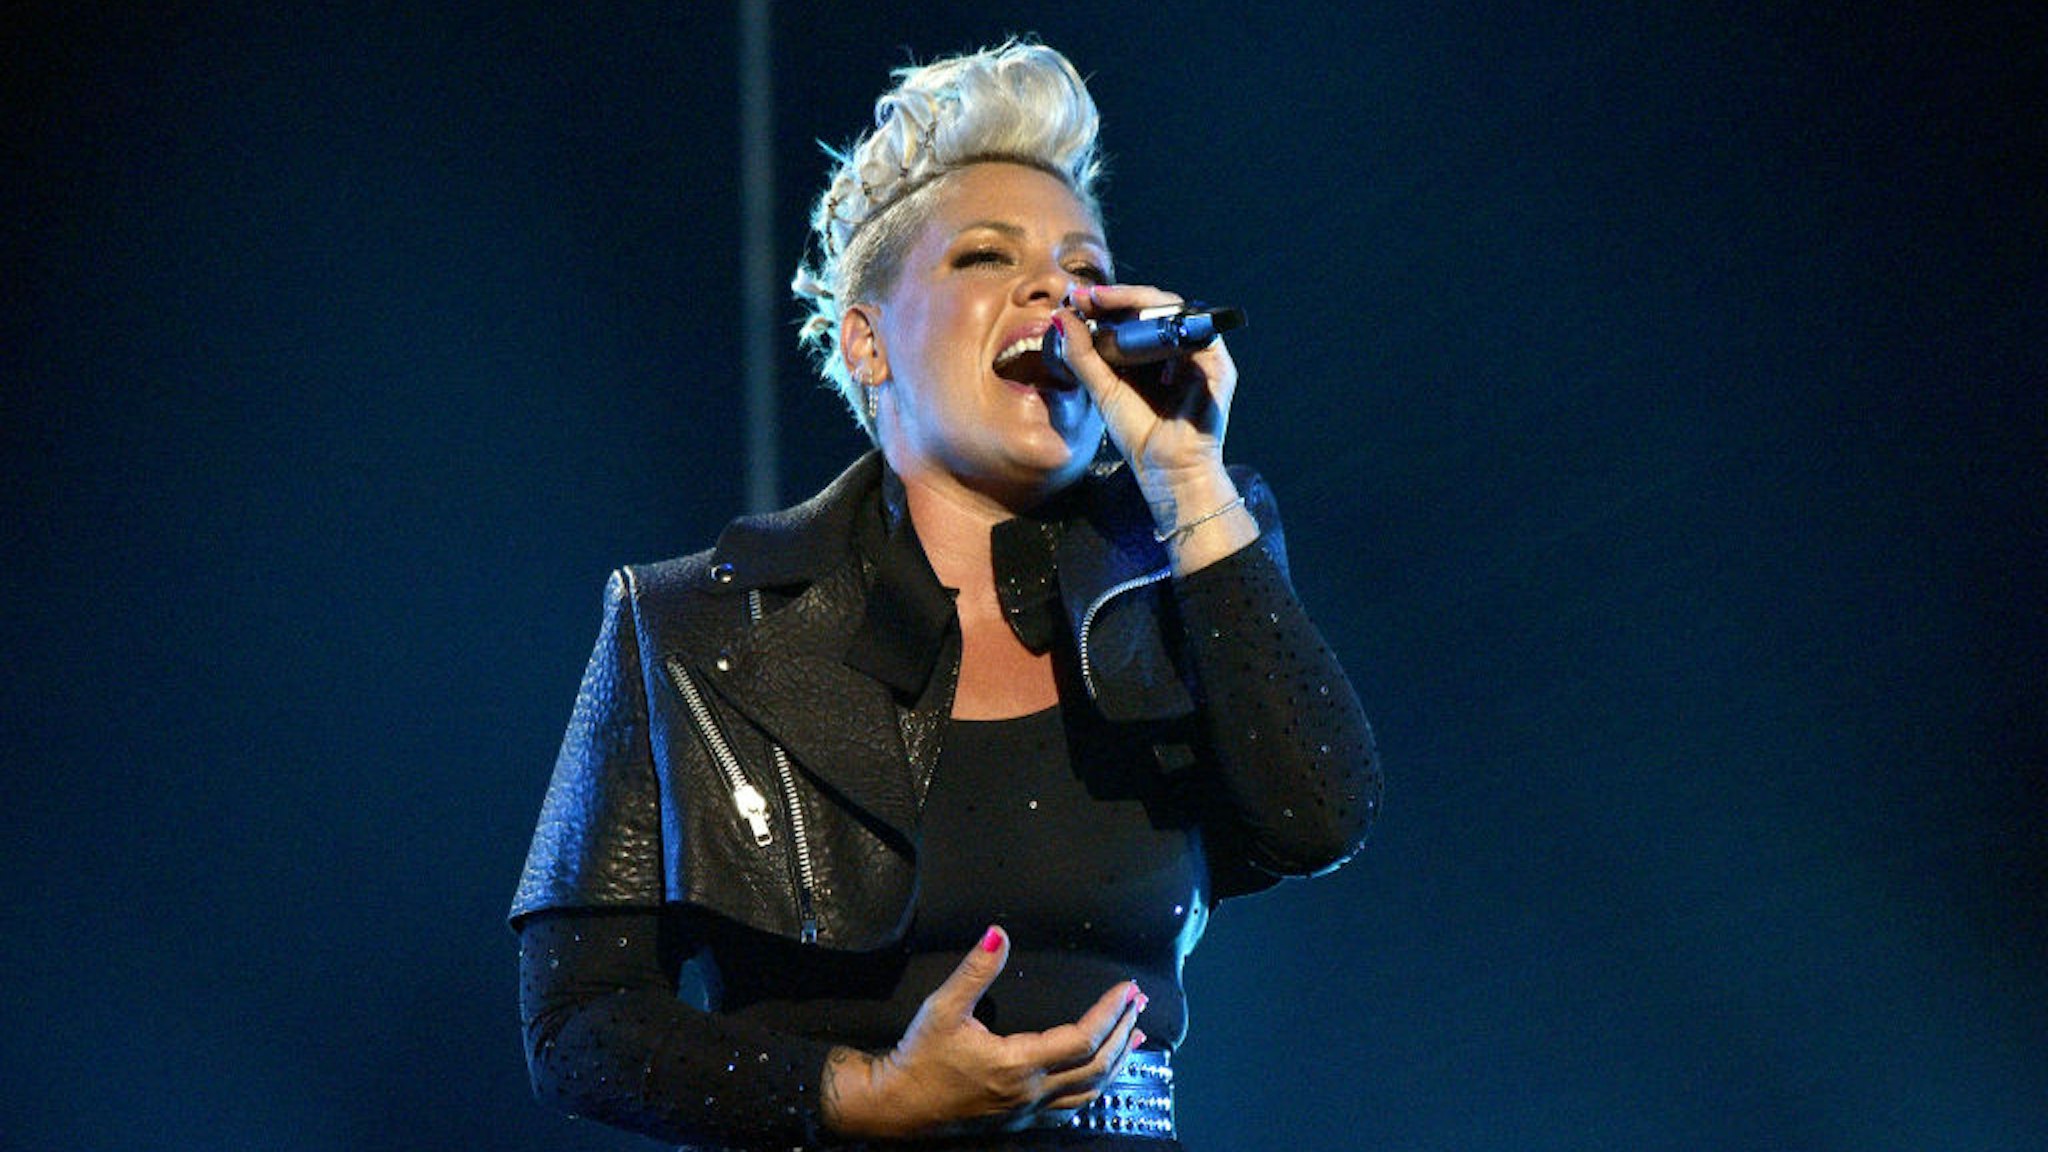 LOS ANGELES, CALIFORNIA - MAY 23: In this image released on May 23, P!nk performs onstage for the 2021 Billboard Music Awards, broadcast on May 23, 2021 at Microsoft Theater in Los Angeles, California. (Photo by Kevin Mazur/Getty Images for dcp)